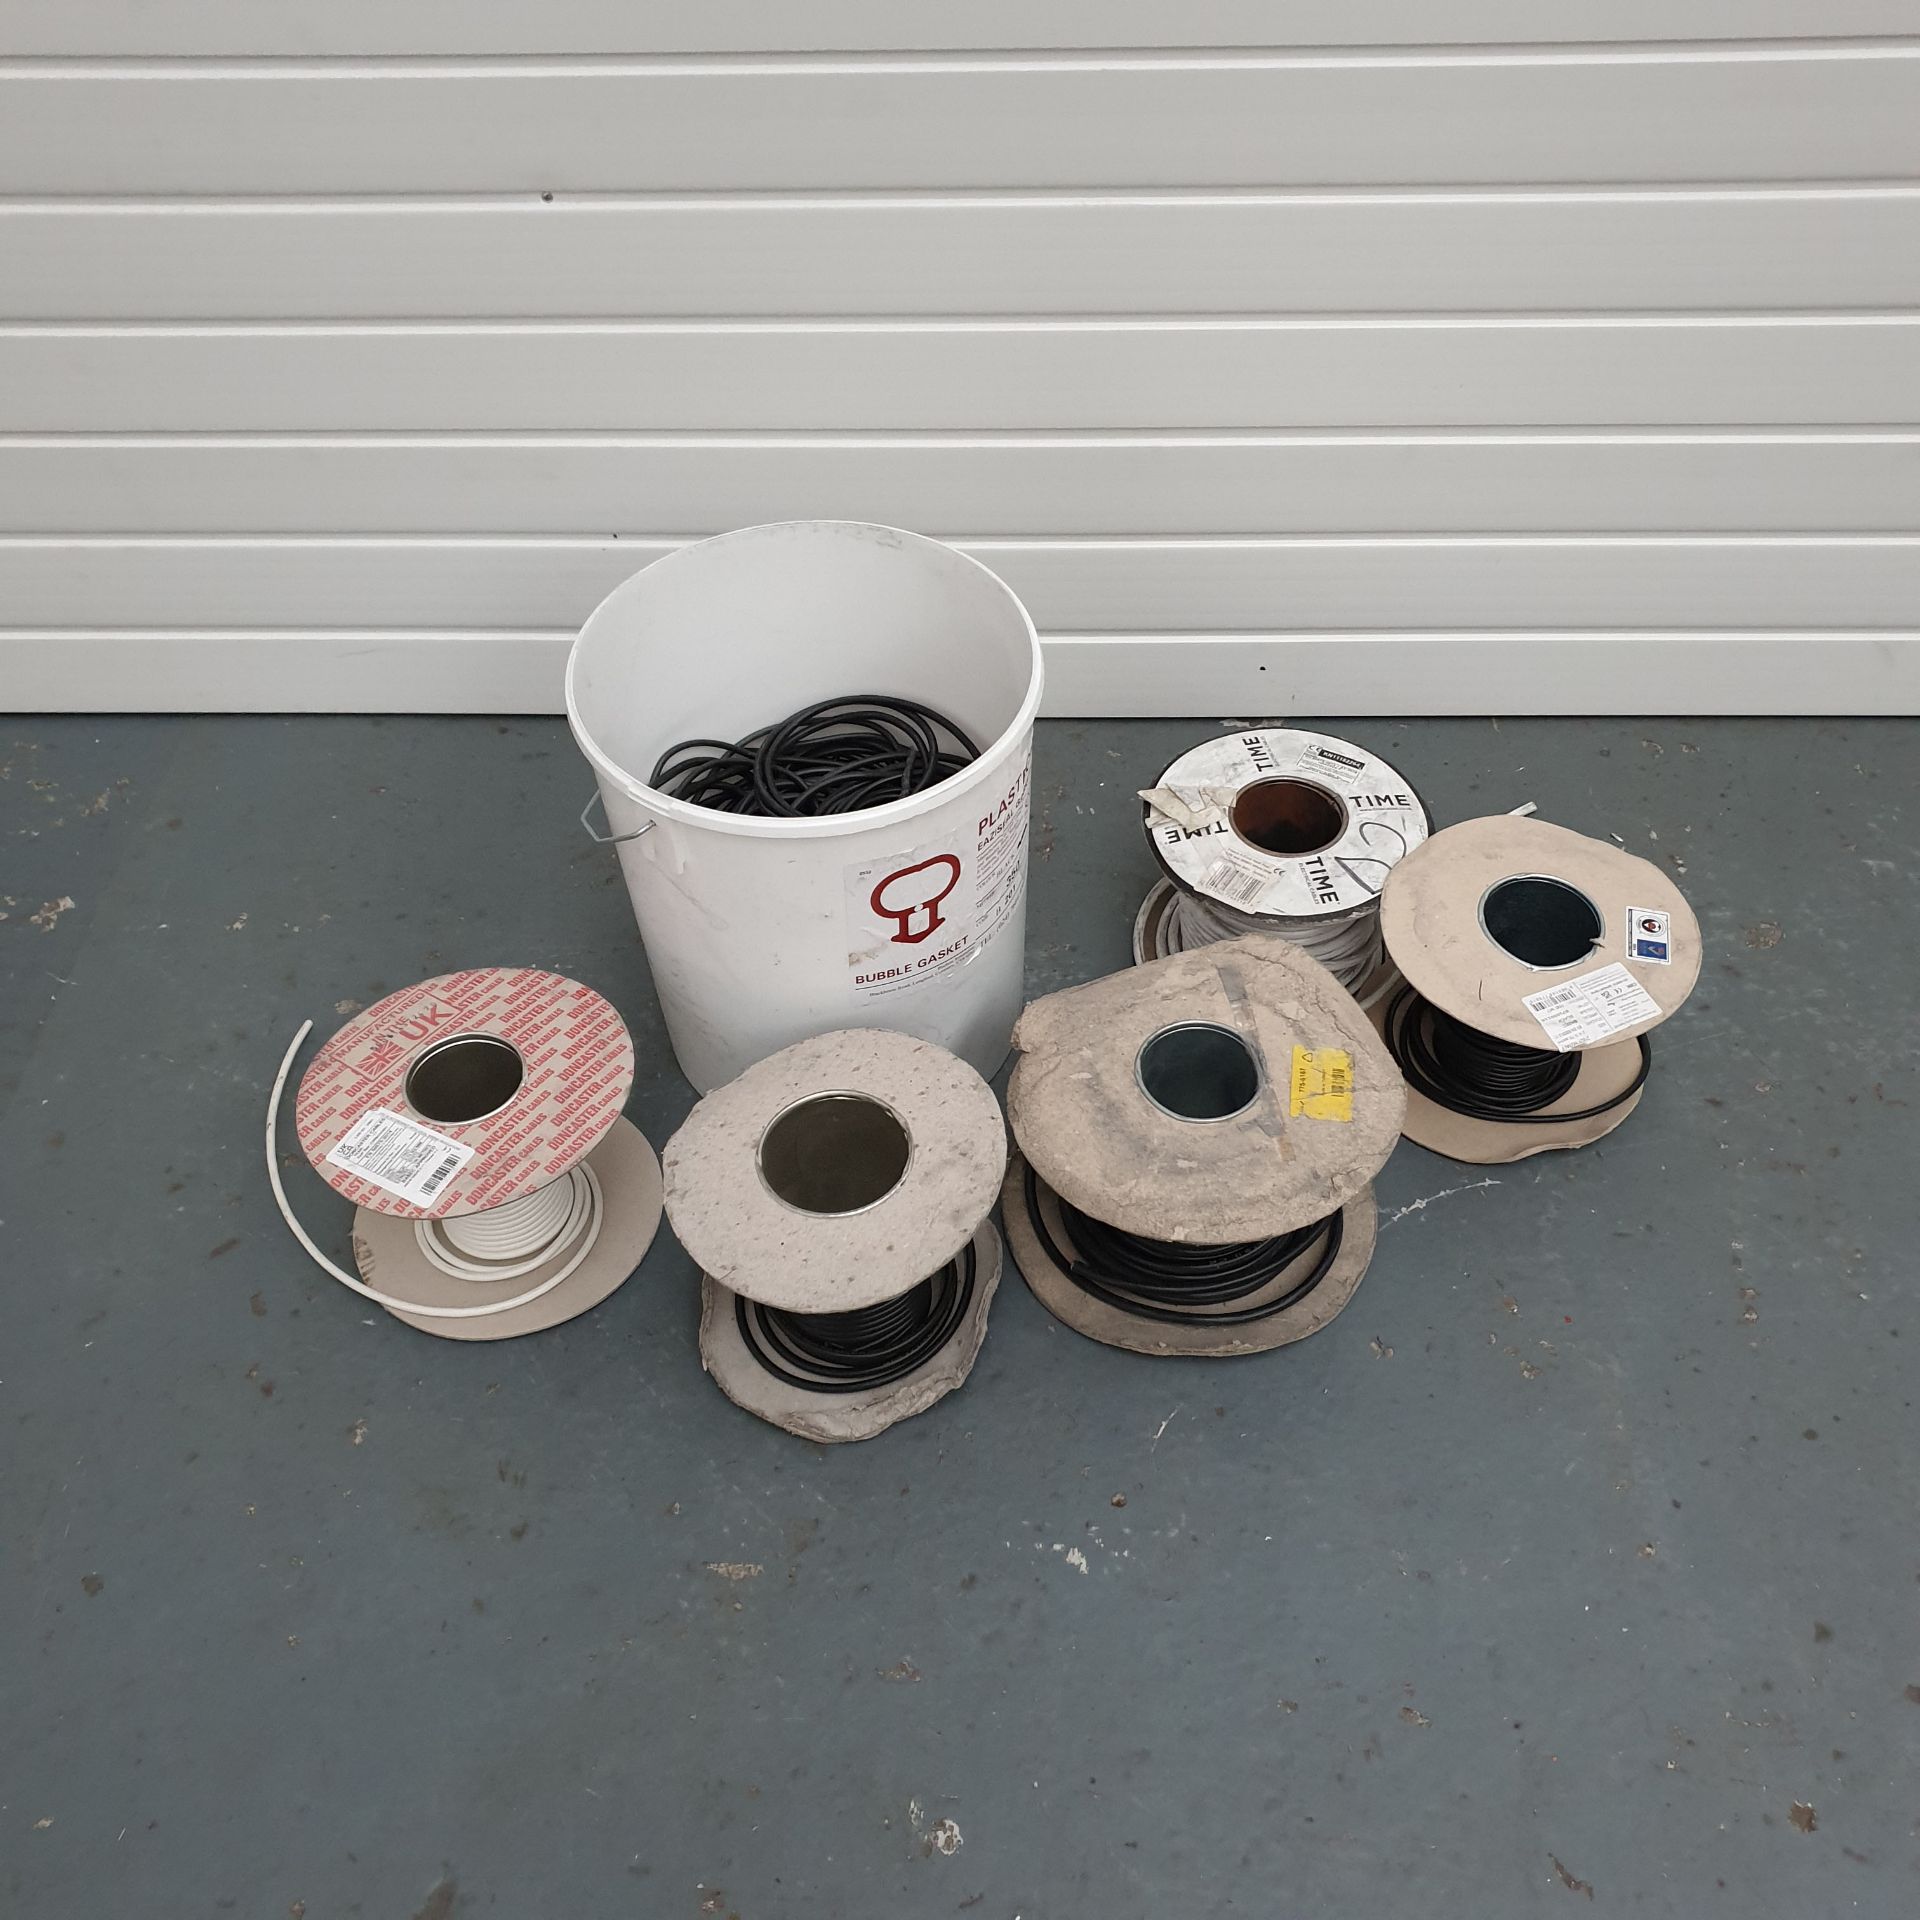 Quantity of Part Rolls of Electrical Wire.